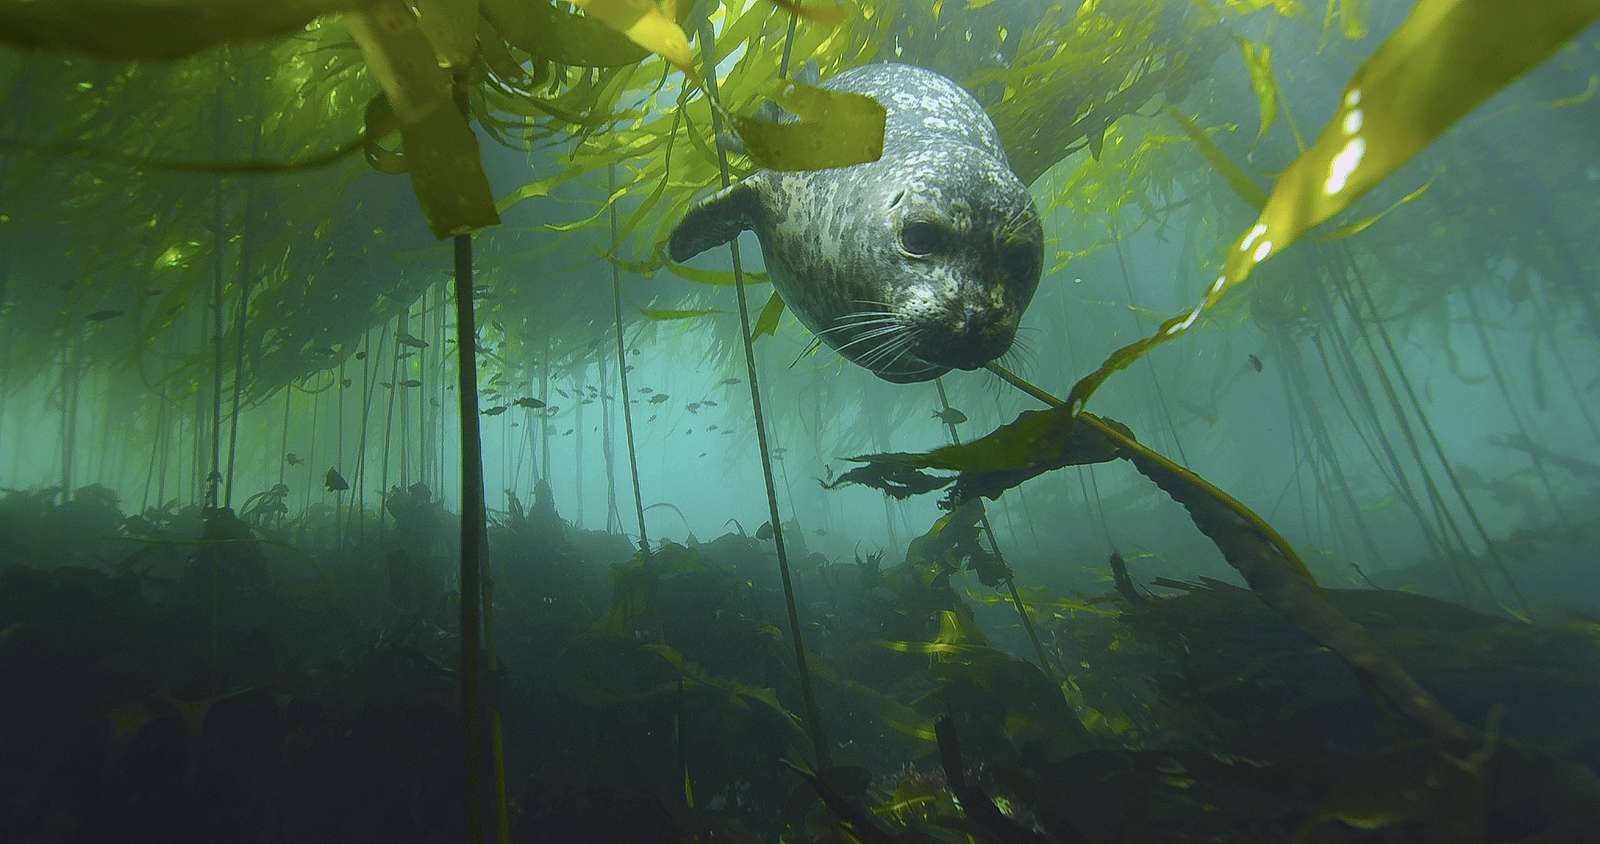 Whos hiding in the kelp forest? puzzle online from photo